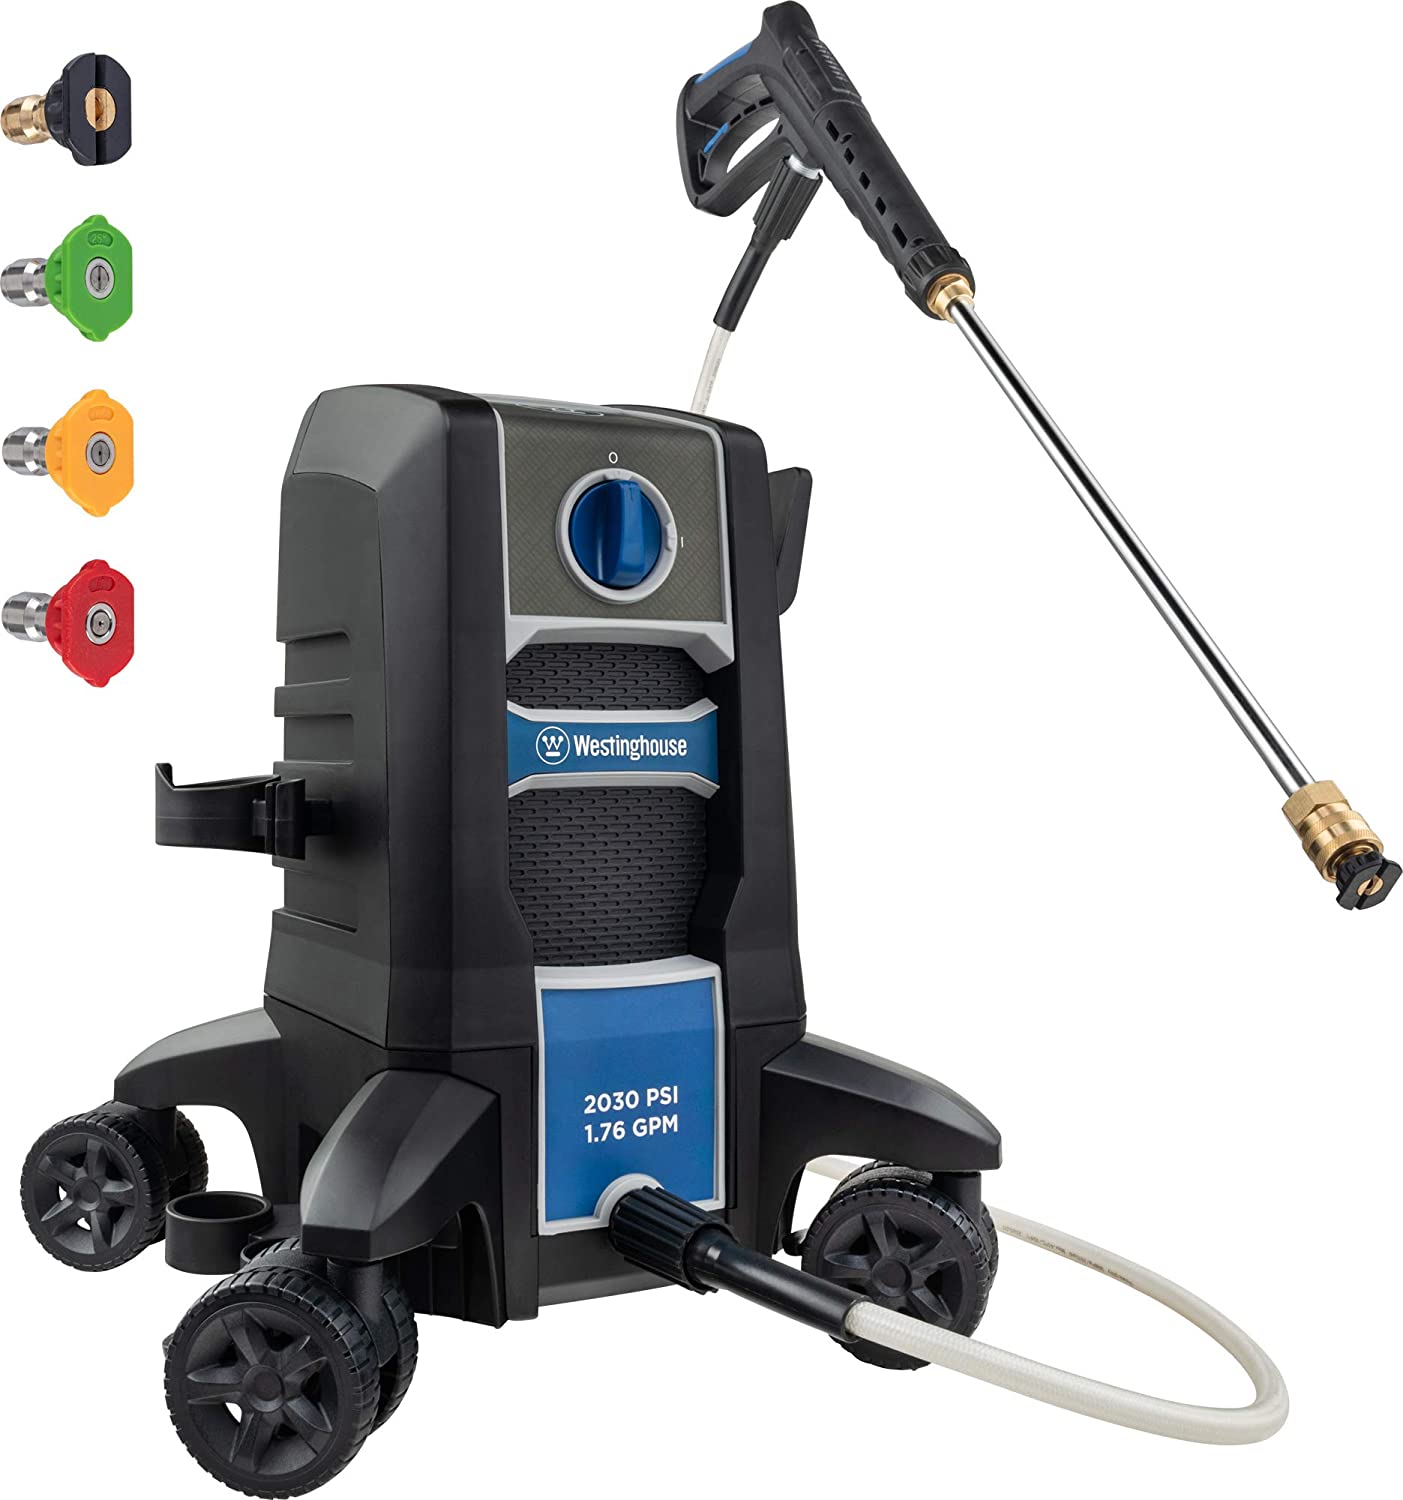 Westinghouse ePX3000 2050 PSI Electric Pressure Washer